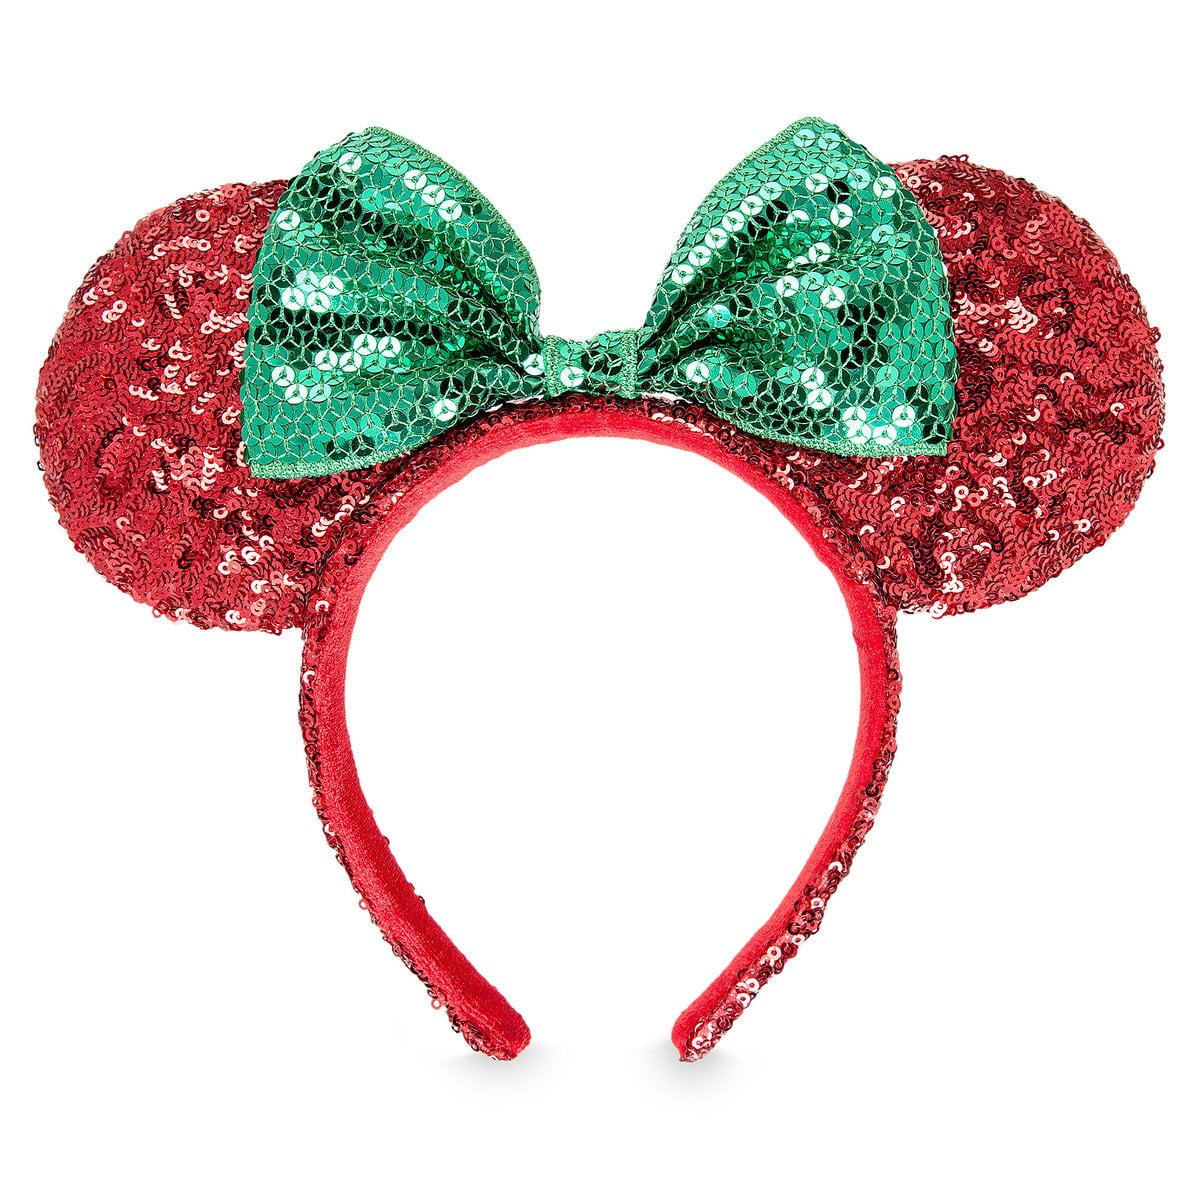 Details about   Disney Park Red Big Bow Minnie Mouse Ears White Polka Dot Limited Headband 